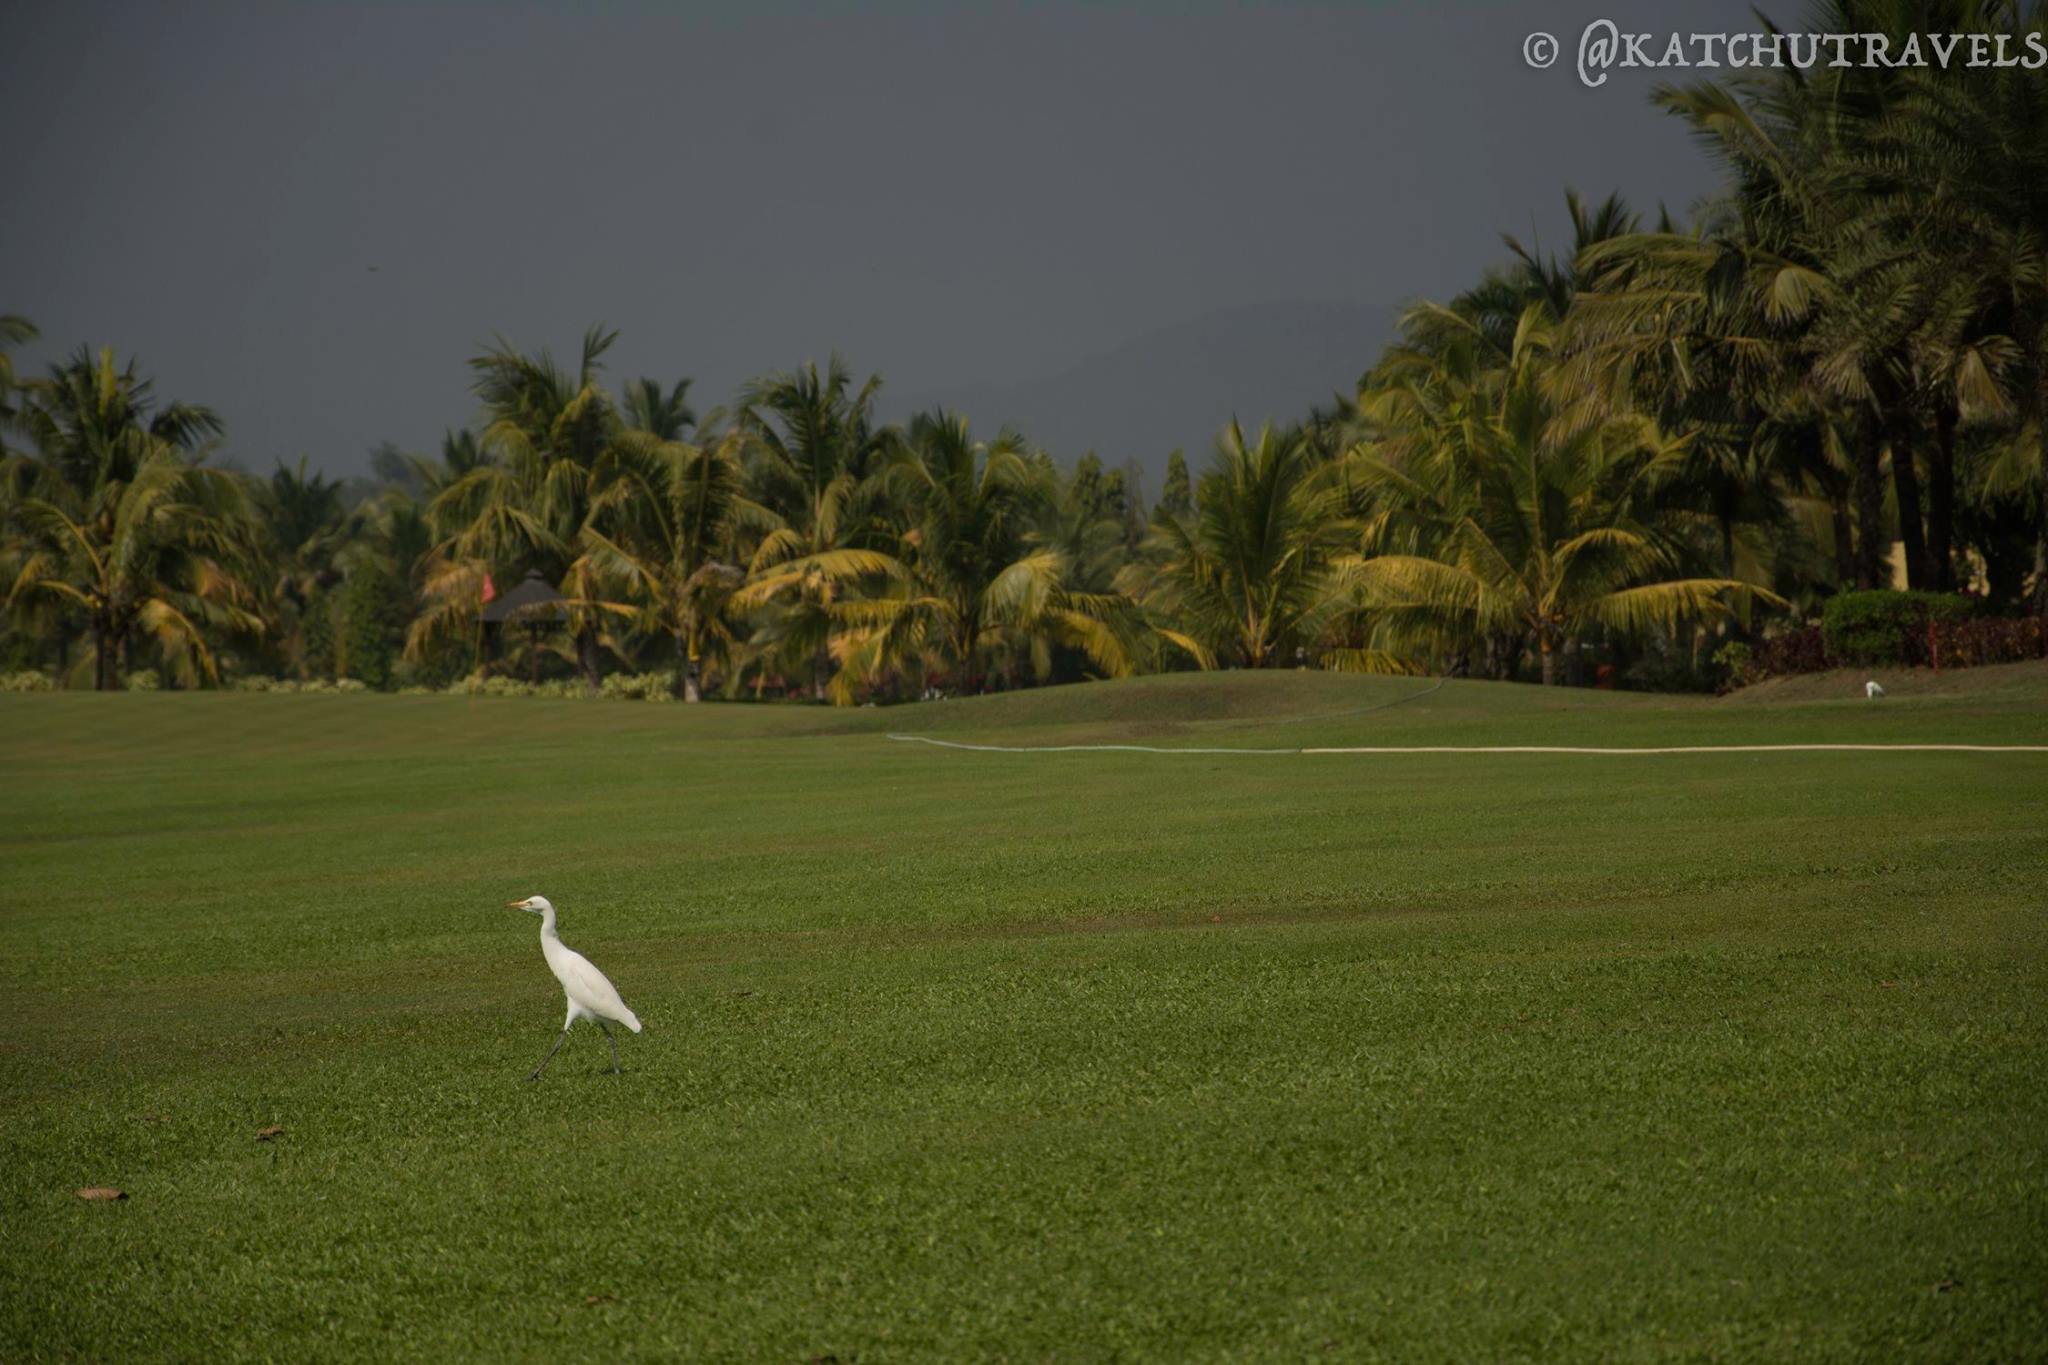 Swan on the lawns of the Lalit-Intercontinental Golf Course. We passed them on a bike parallel to the course!